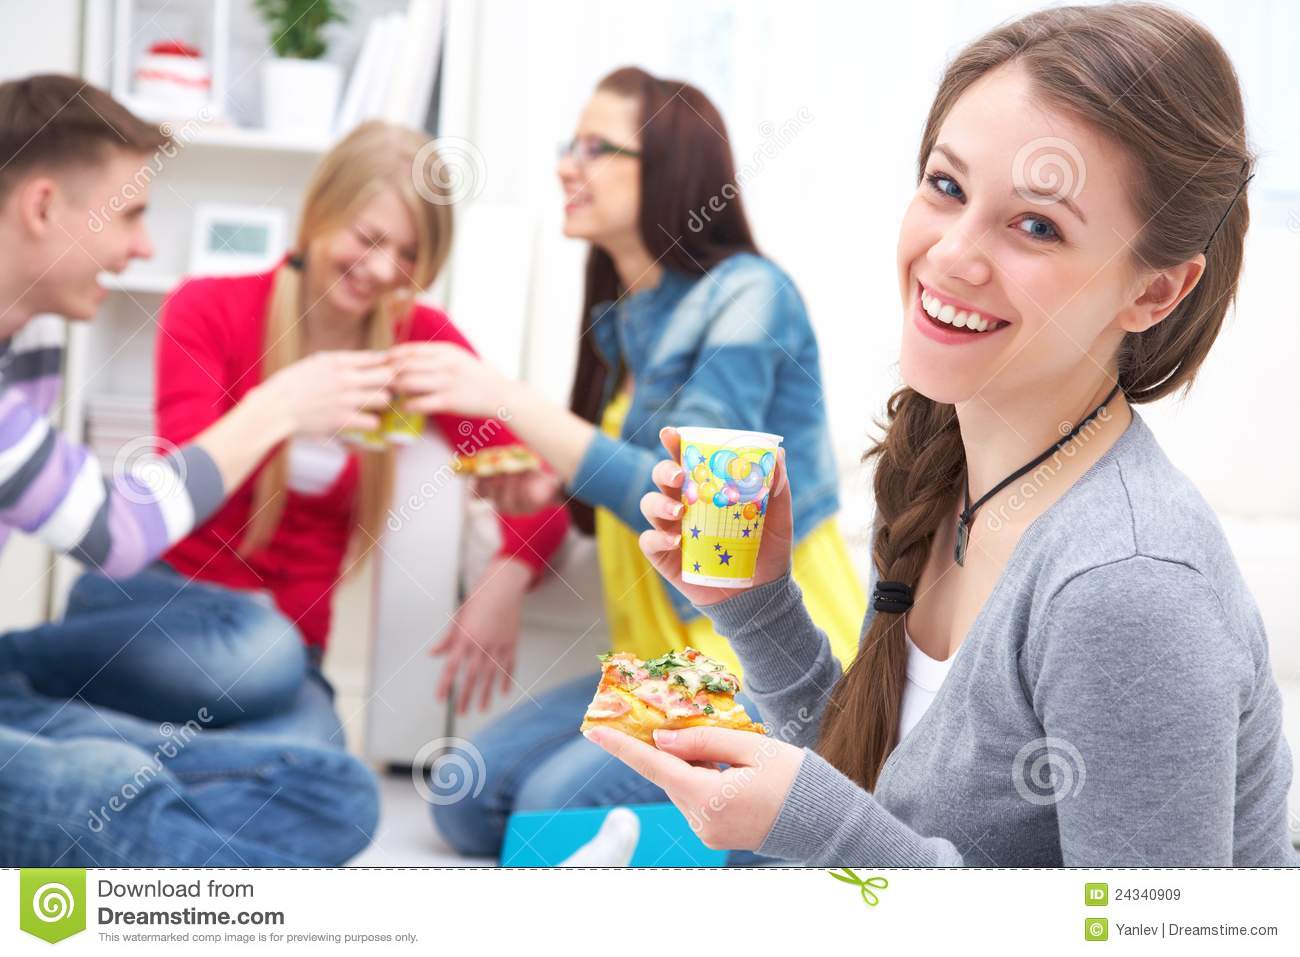 Teens Party With Pizza Royalty Free Stock Images   Image  24340909